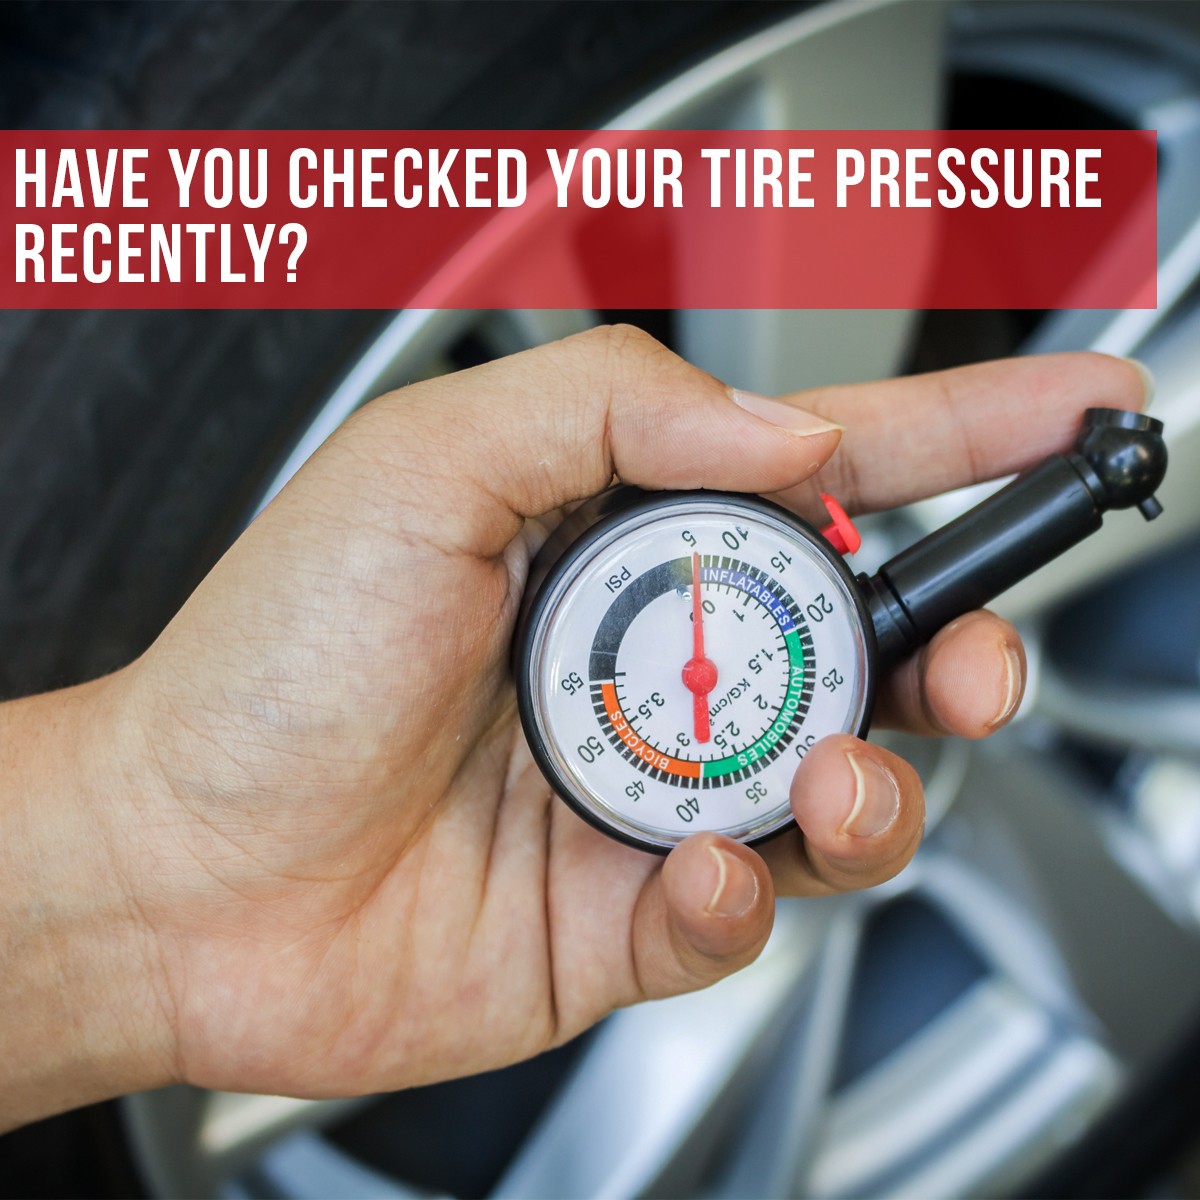 Is one of your tires looking flat? Stop in and we can check the tire pressure and fill it up! #MontanaTireDist